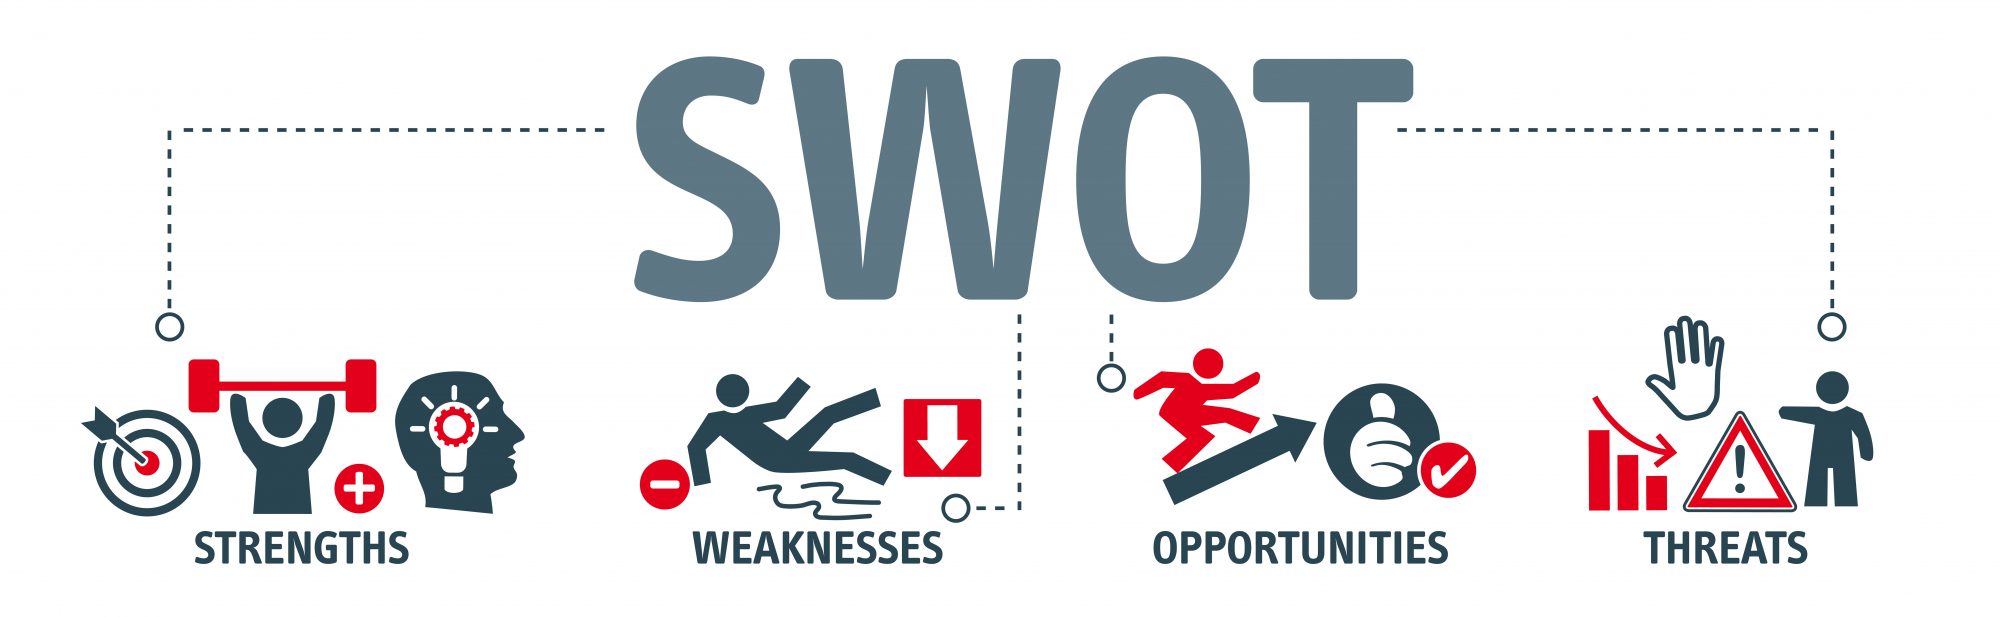 What Is A Swot Analysis And How To Do It For Your Professional Marketing Plan?